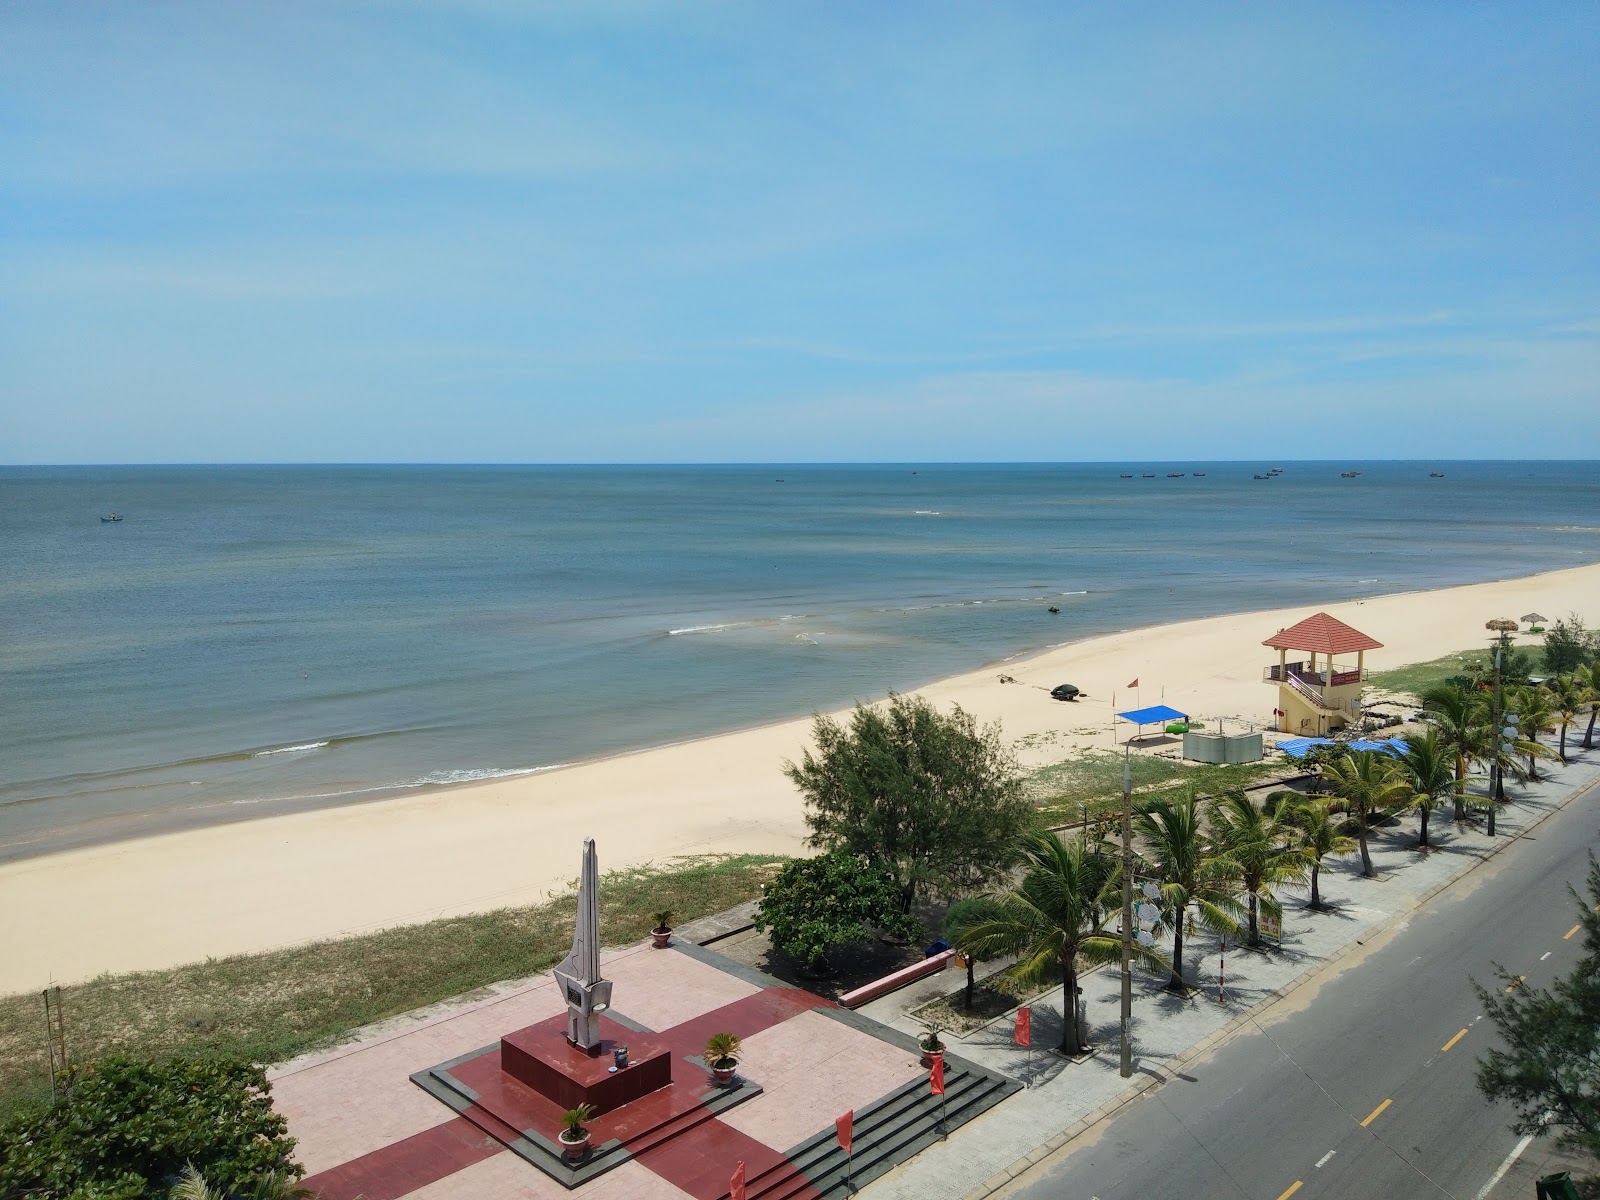 Photo of Nhat Le Beach with bright sand surface